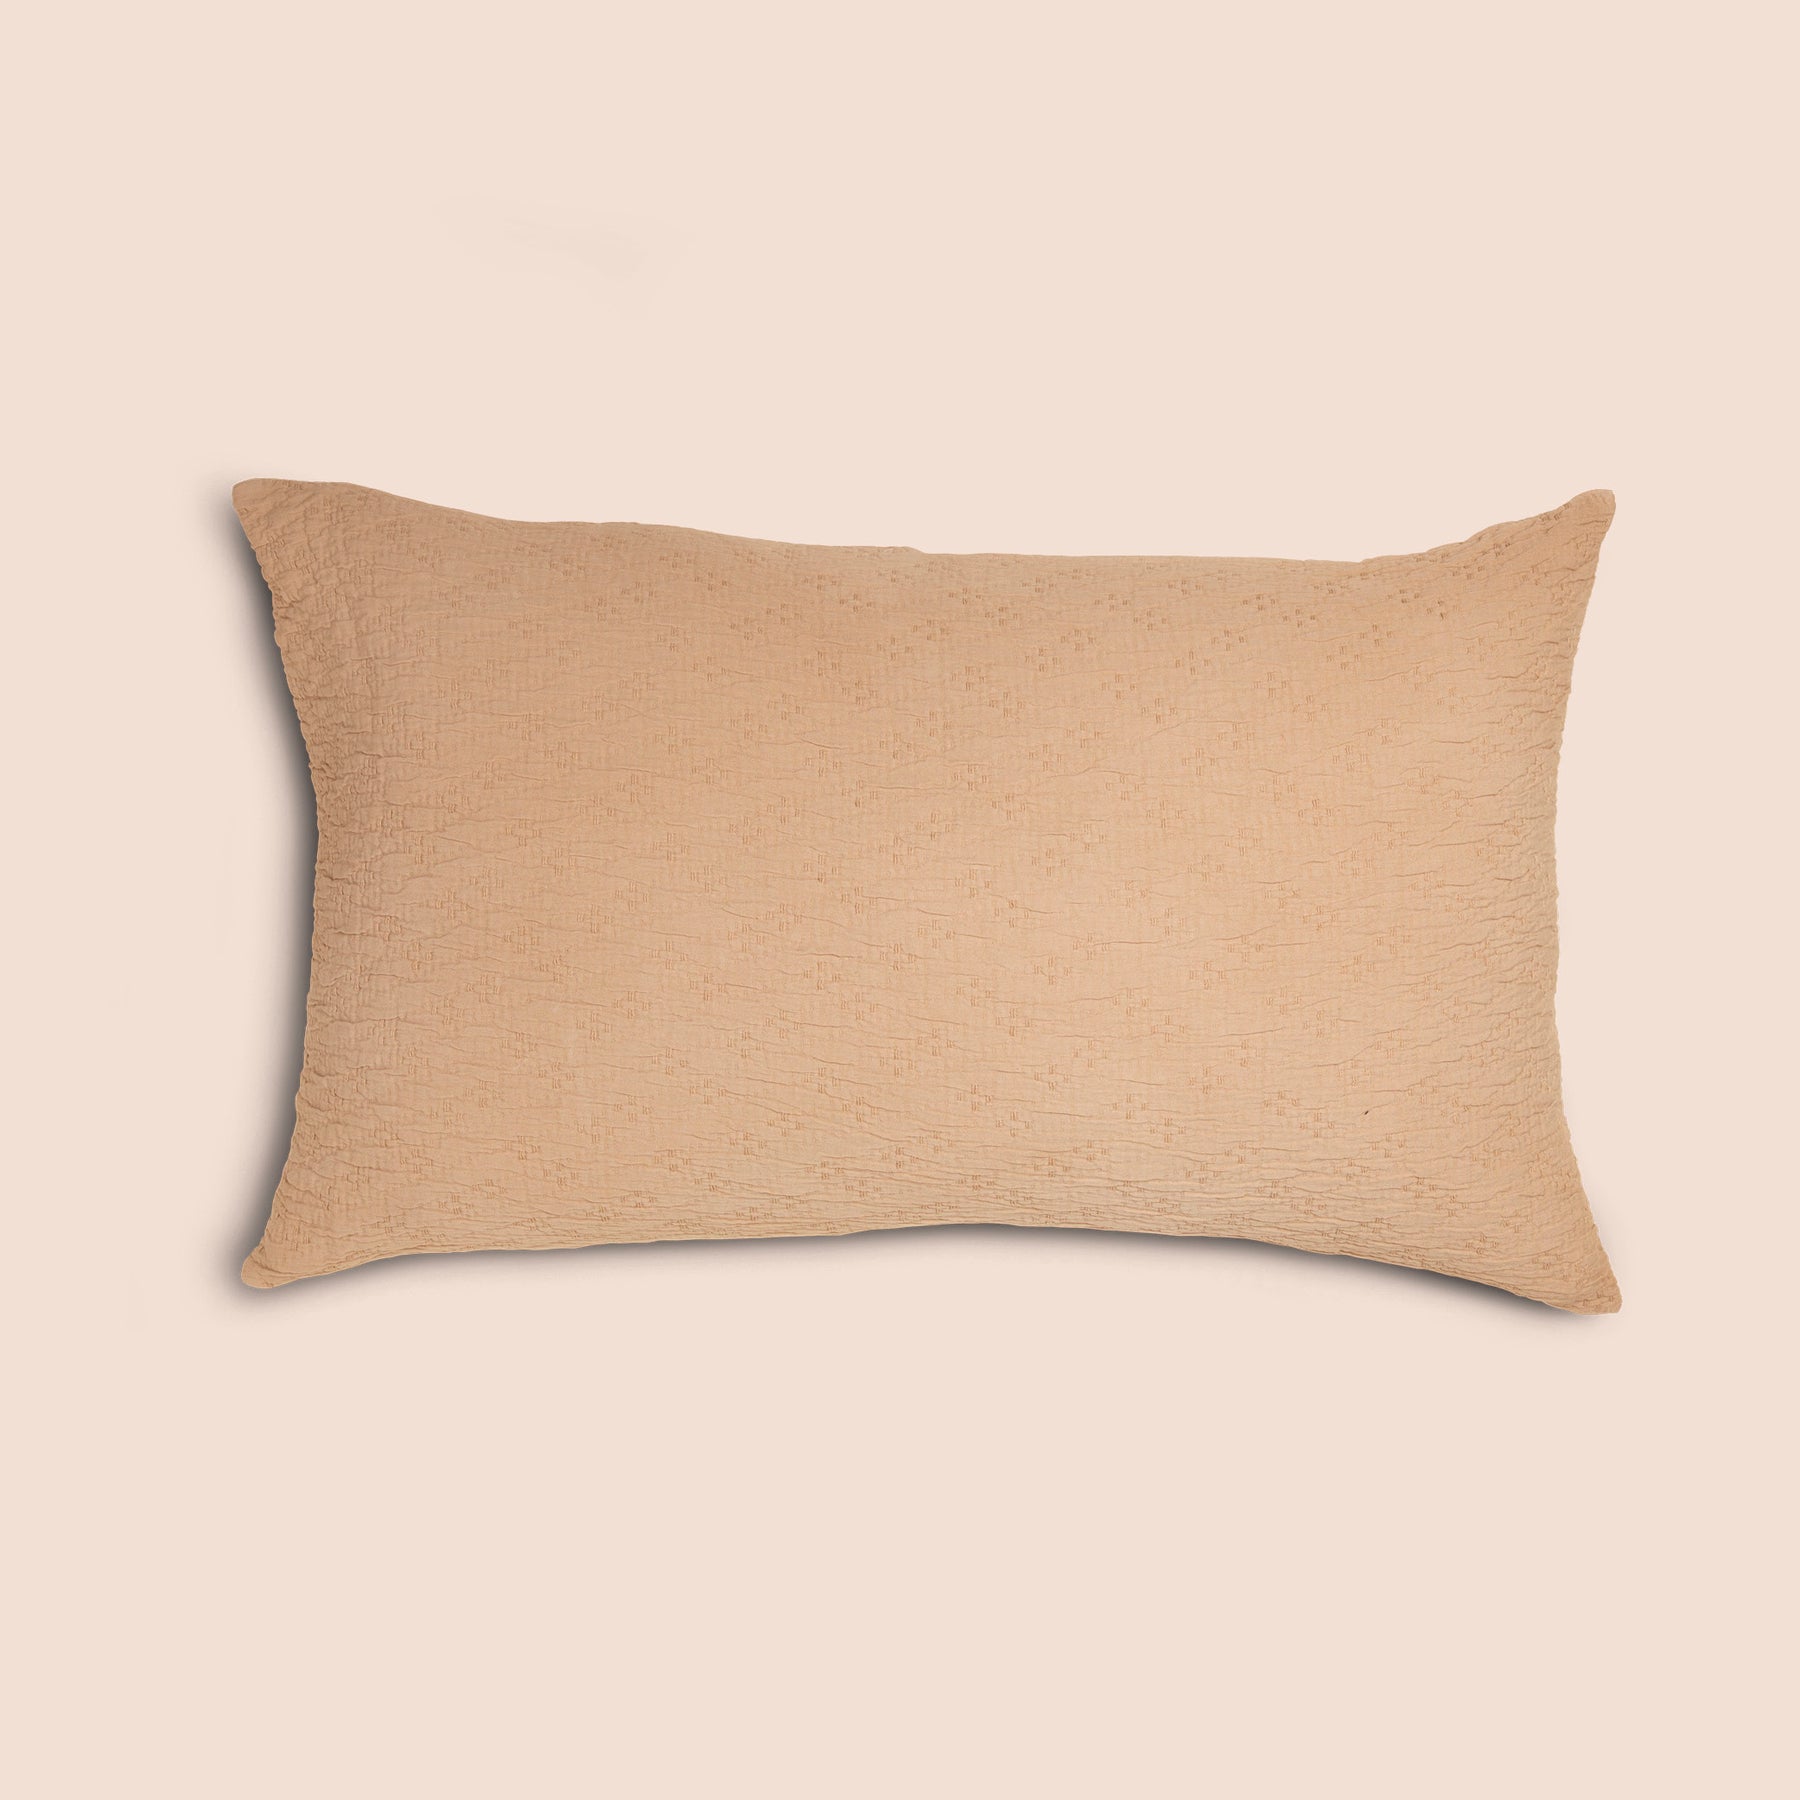 Image of an Ochre Wave Pillow Sham on a pillow with a light pink background